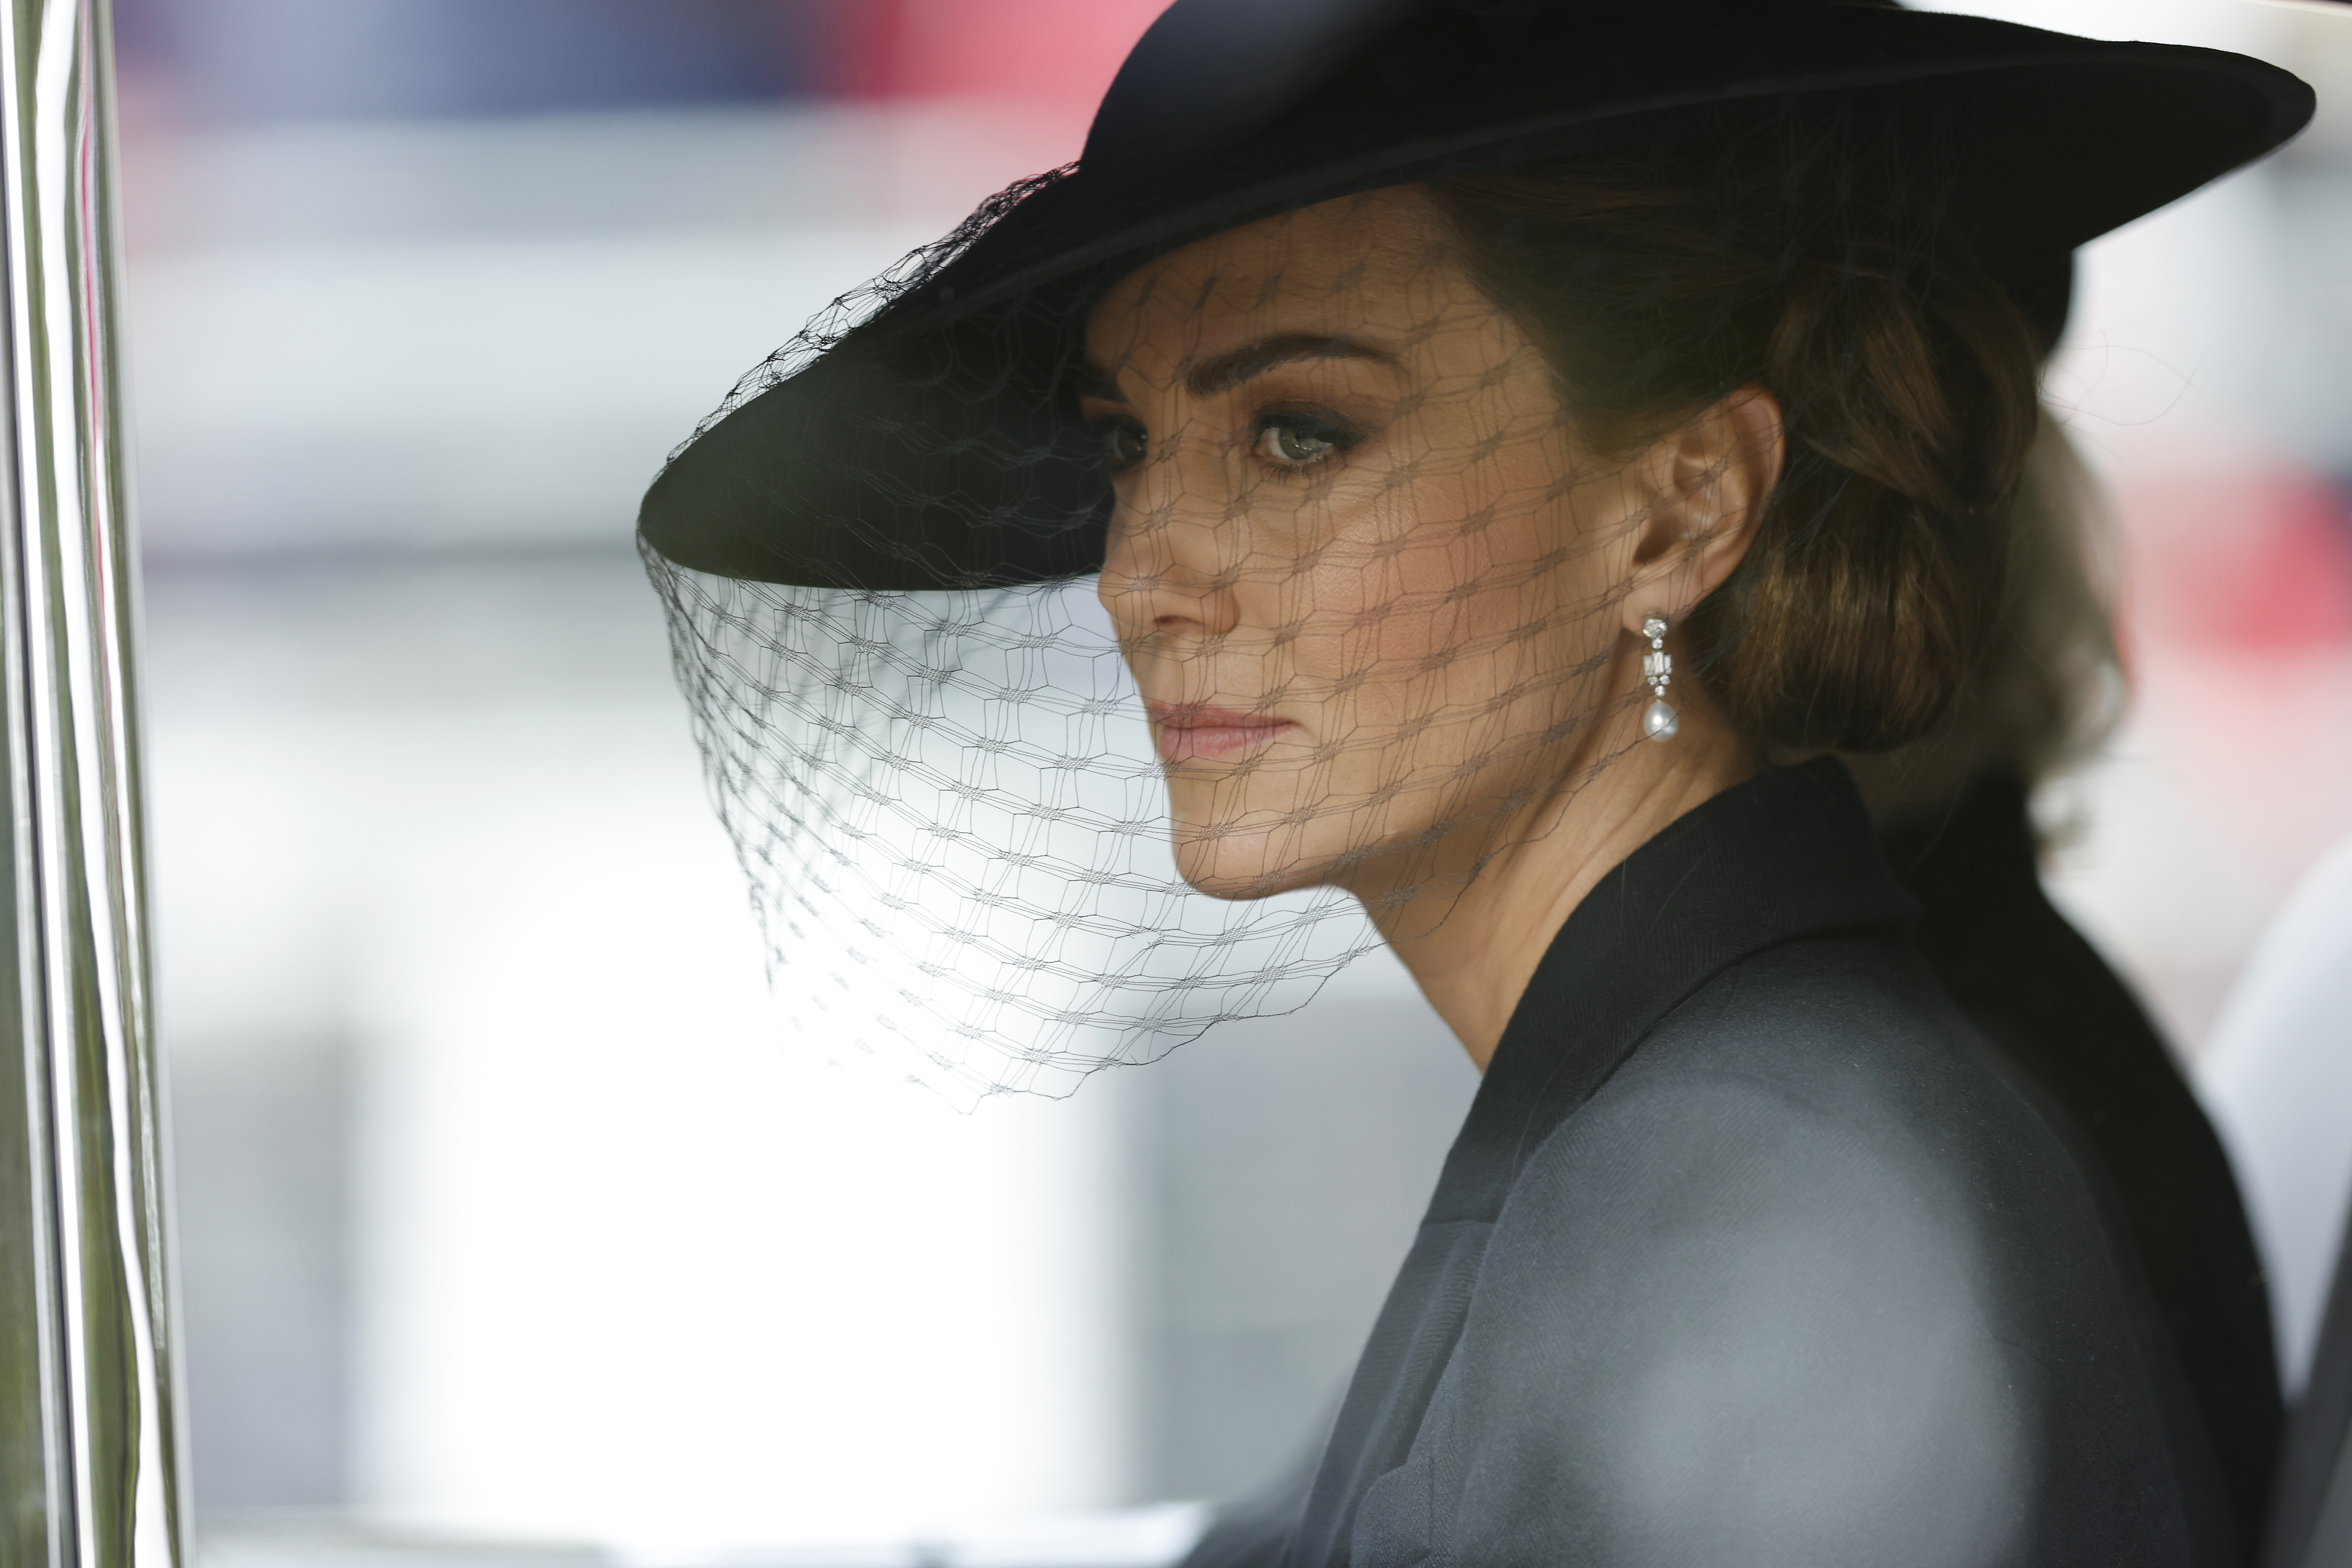 Princess of Wales is driven down The Mall after the funeral for HM Queen Elizabeth II's funeral on September 19, 2022 in London, England | Source: Getty Images